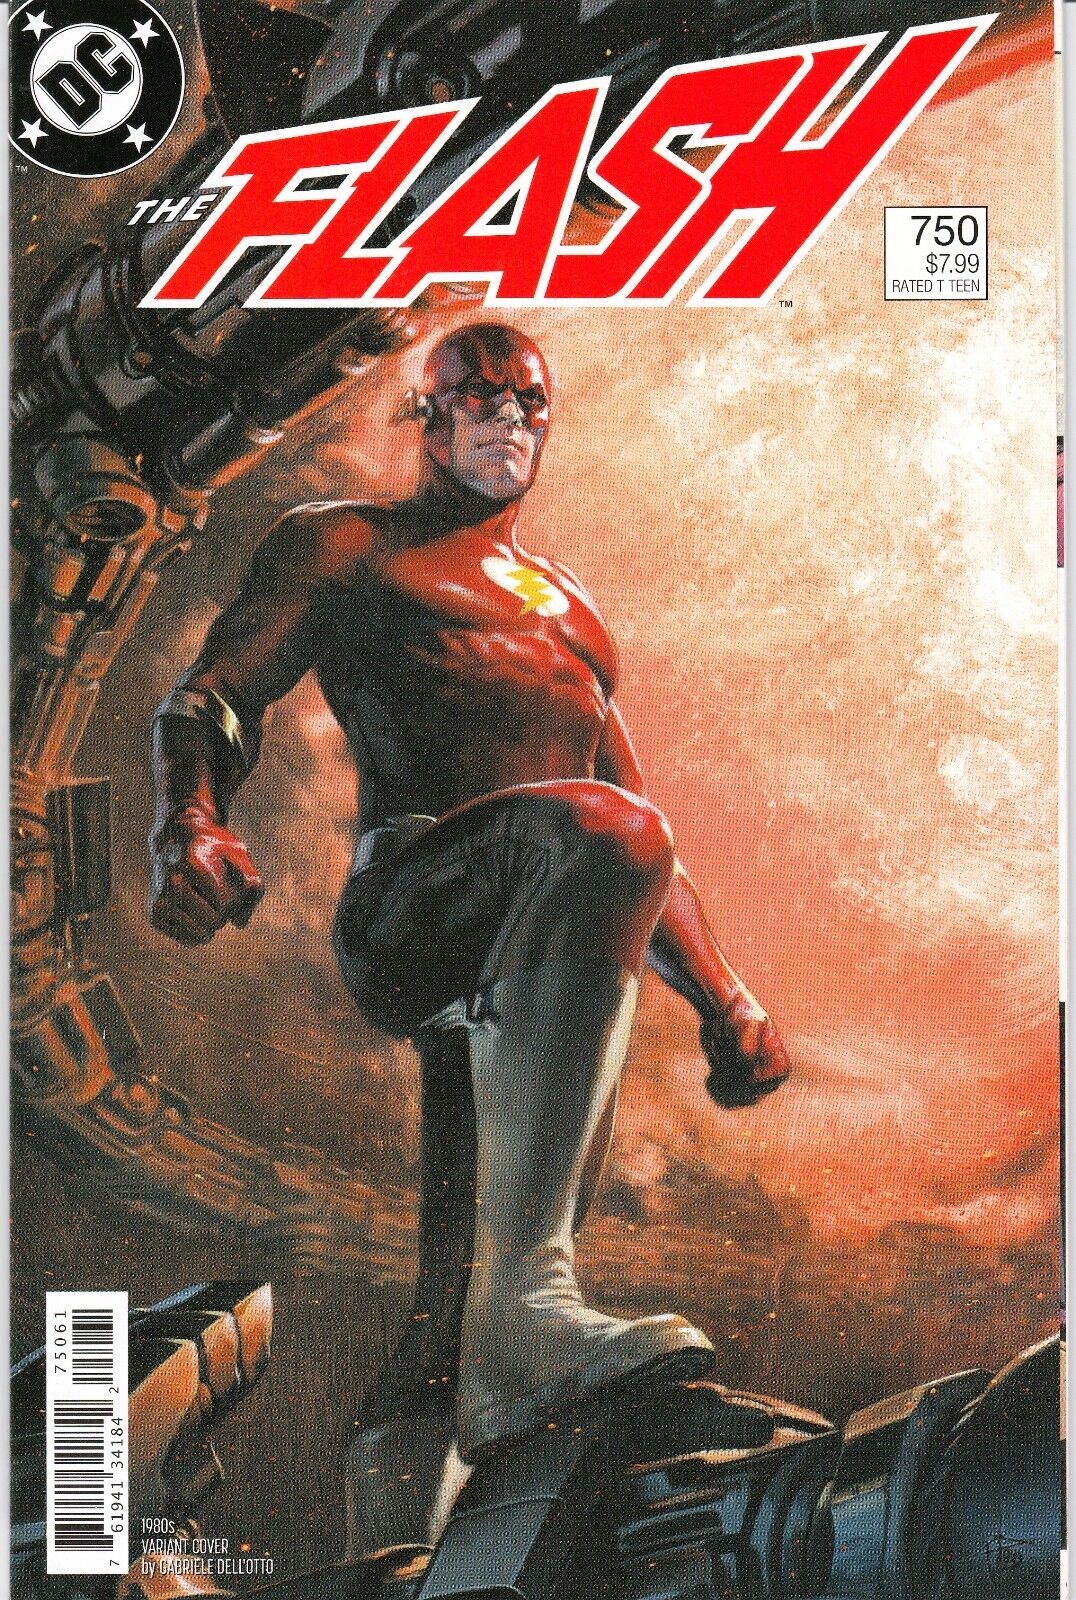 FLASH #750 ~ 80-PAGE SPECTACULAR (2016) G. DELL-OTTO SQUAREBOUND VARIANT ~ NM